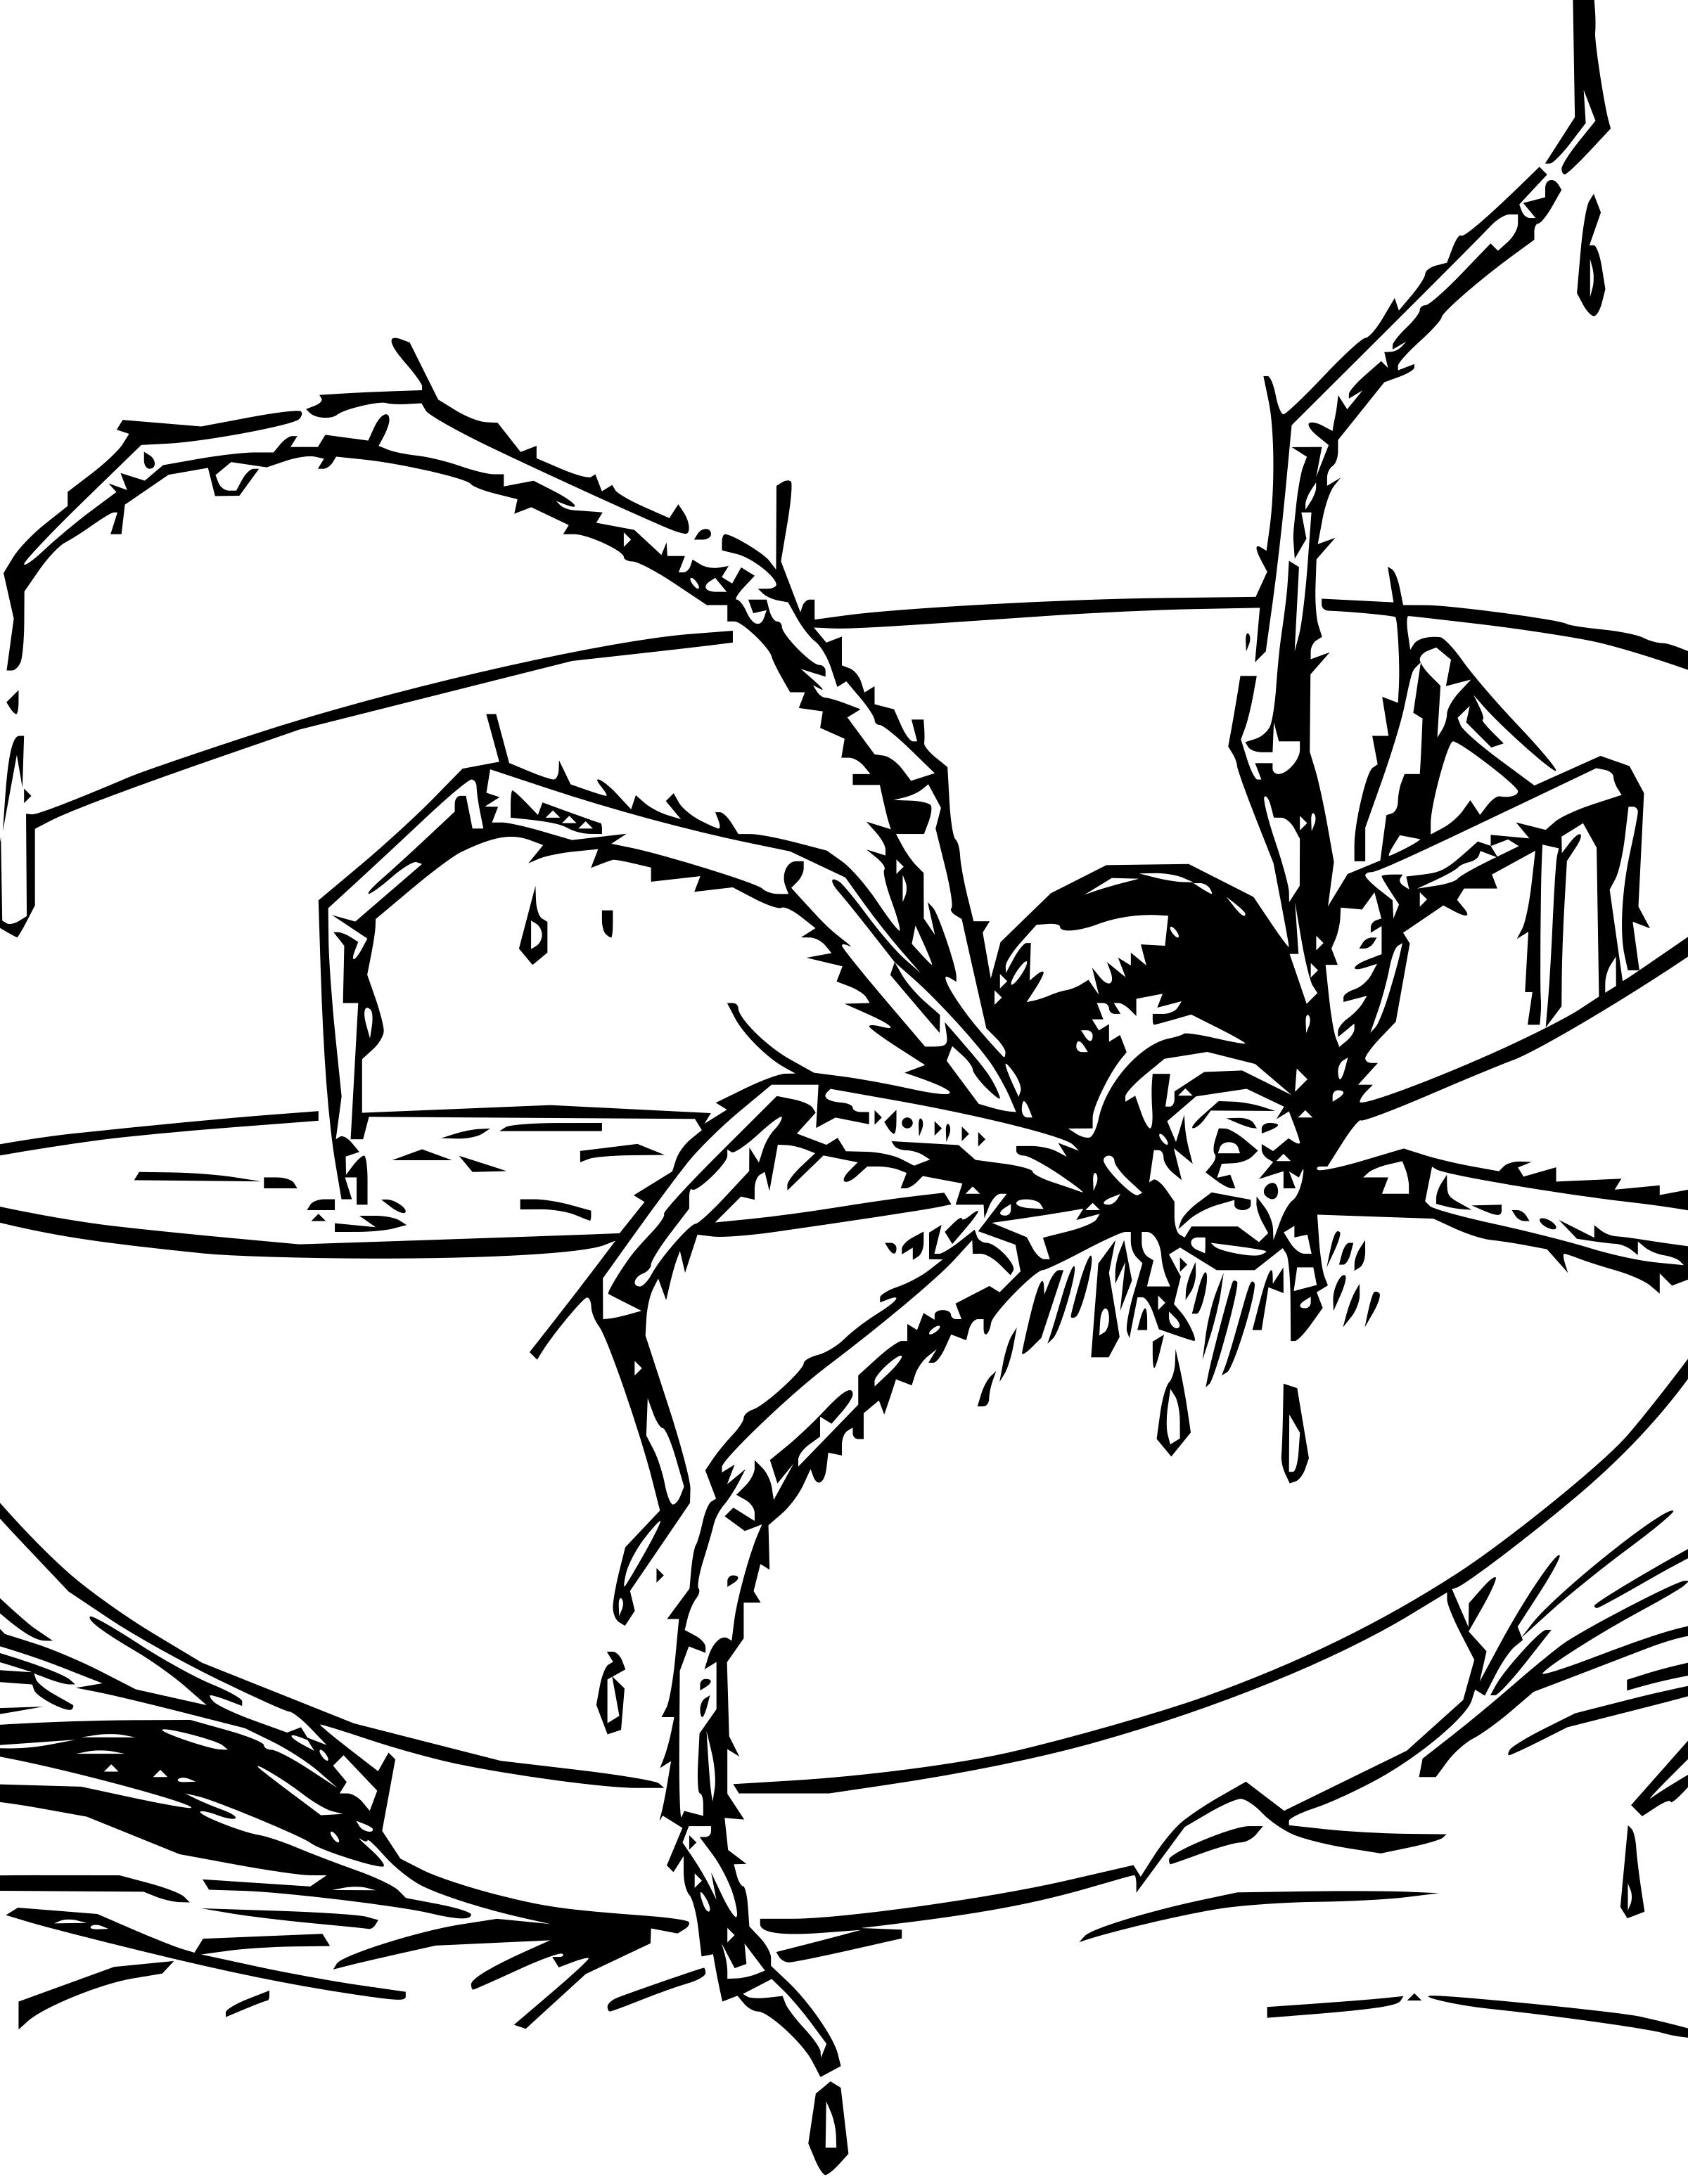 Miss Muffet's Spider png